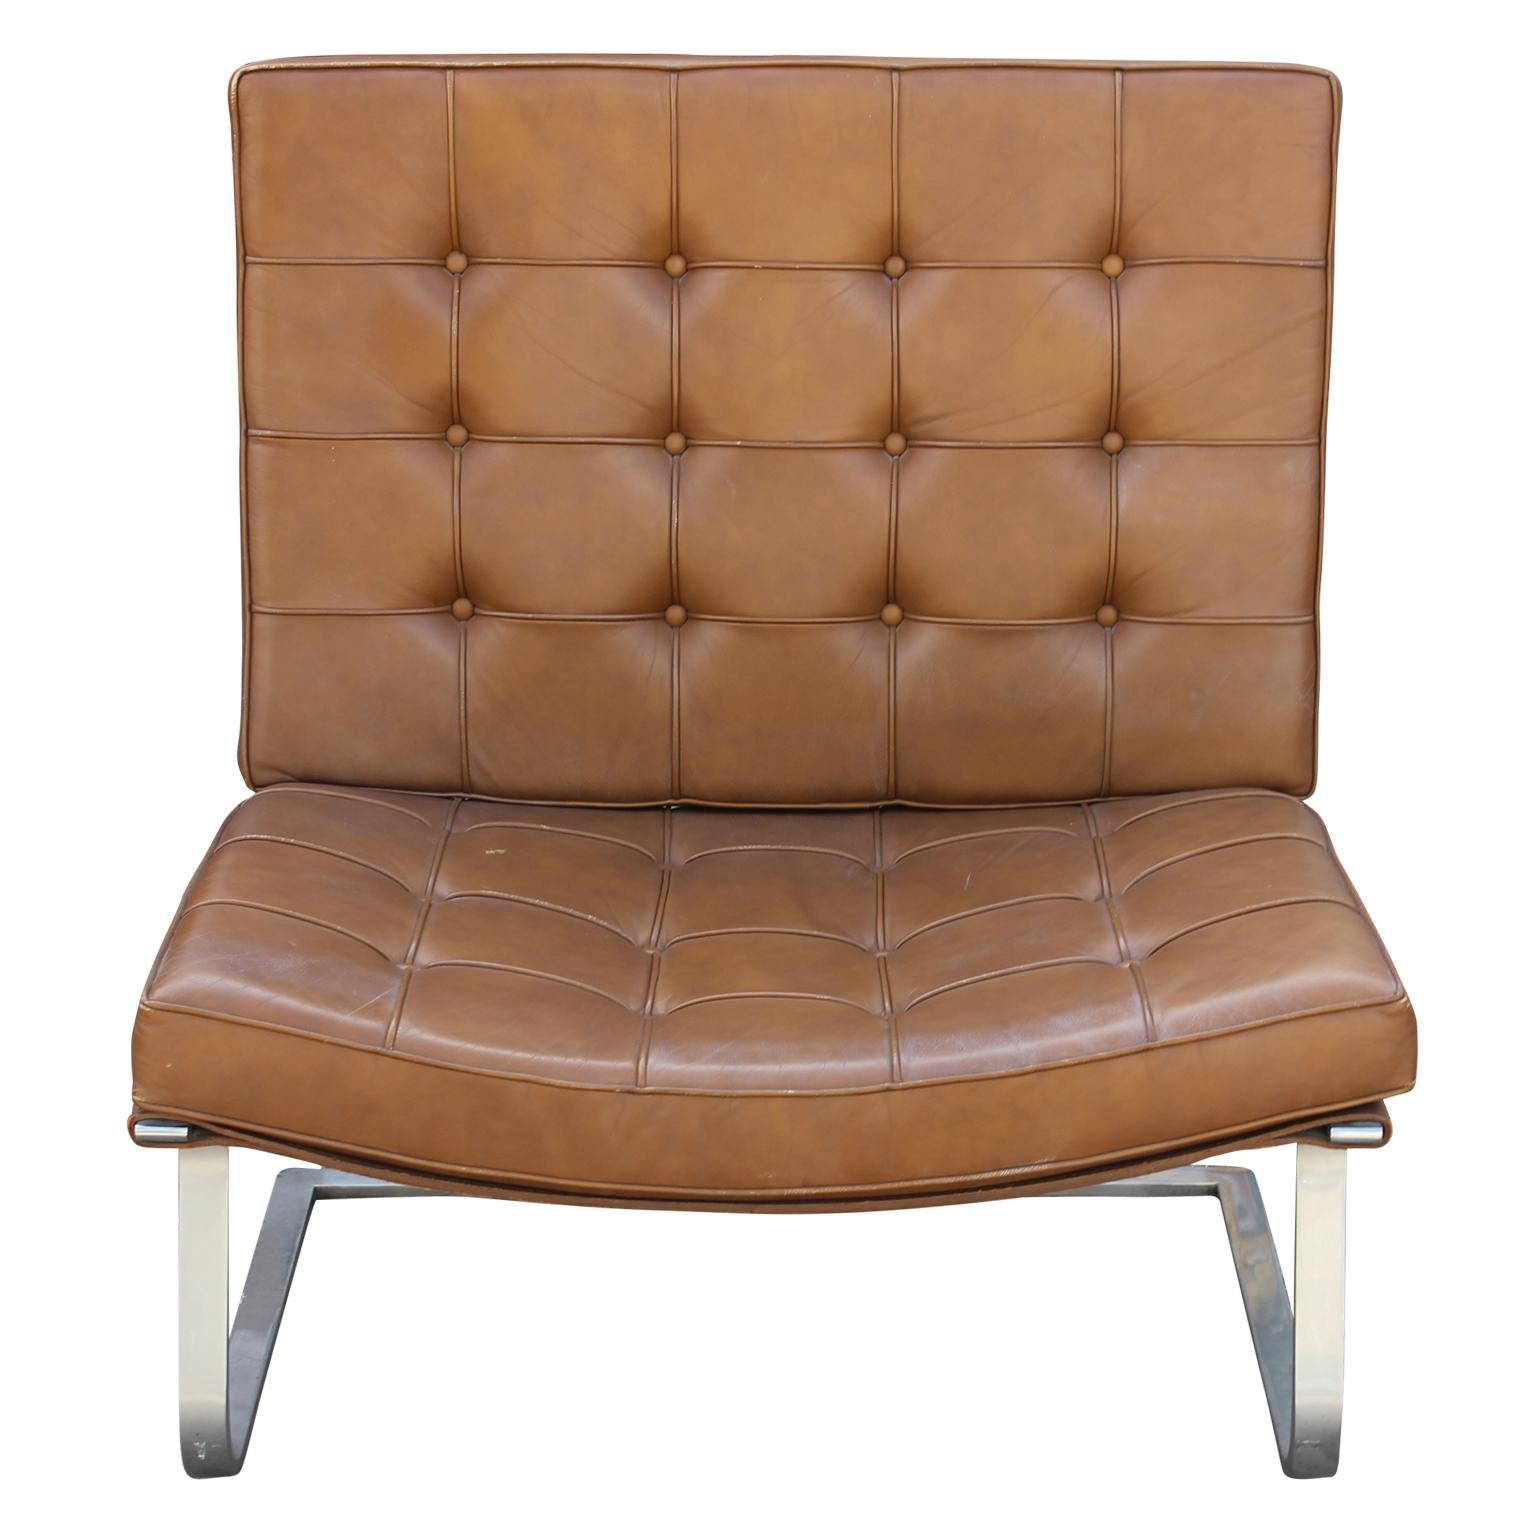 Stunning set of four, original brown leather Mies Van Der Rohe Tugendhat chairs. The material is a caramel colored brown leather. Polished stainless steel. The cantilever design provides a natural spring.